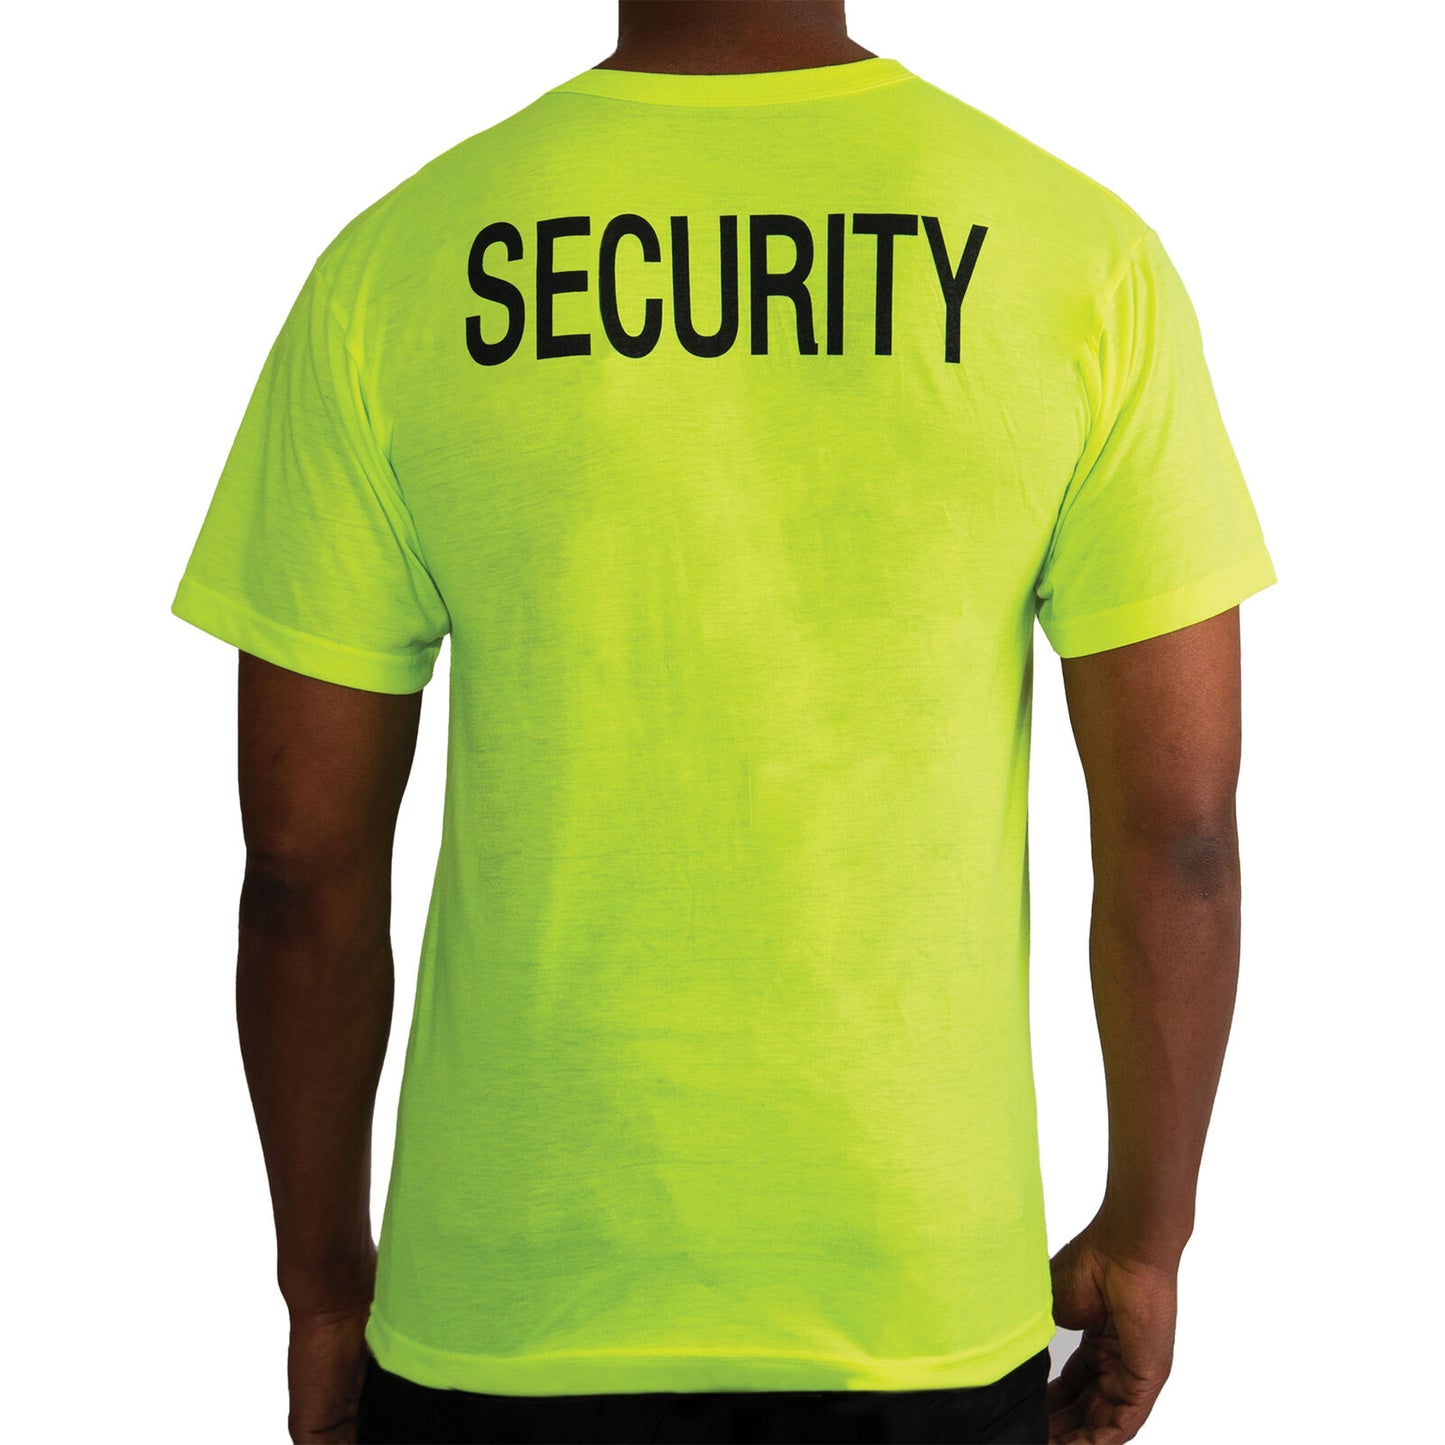 Men's 2-Sided "SECURITY" T-Shirt in Safety Neon Green